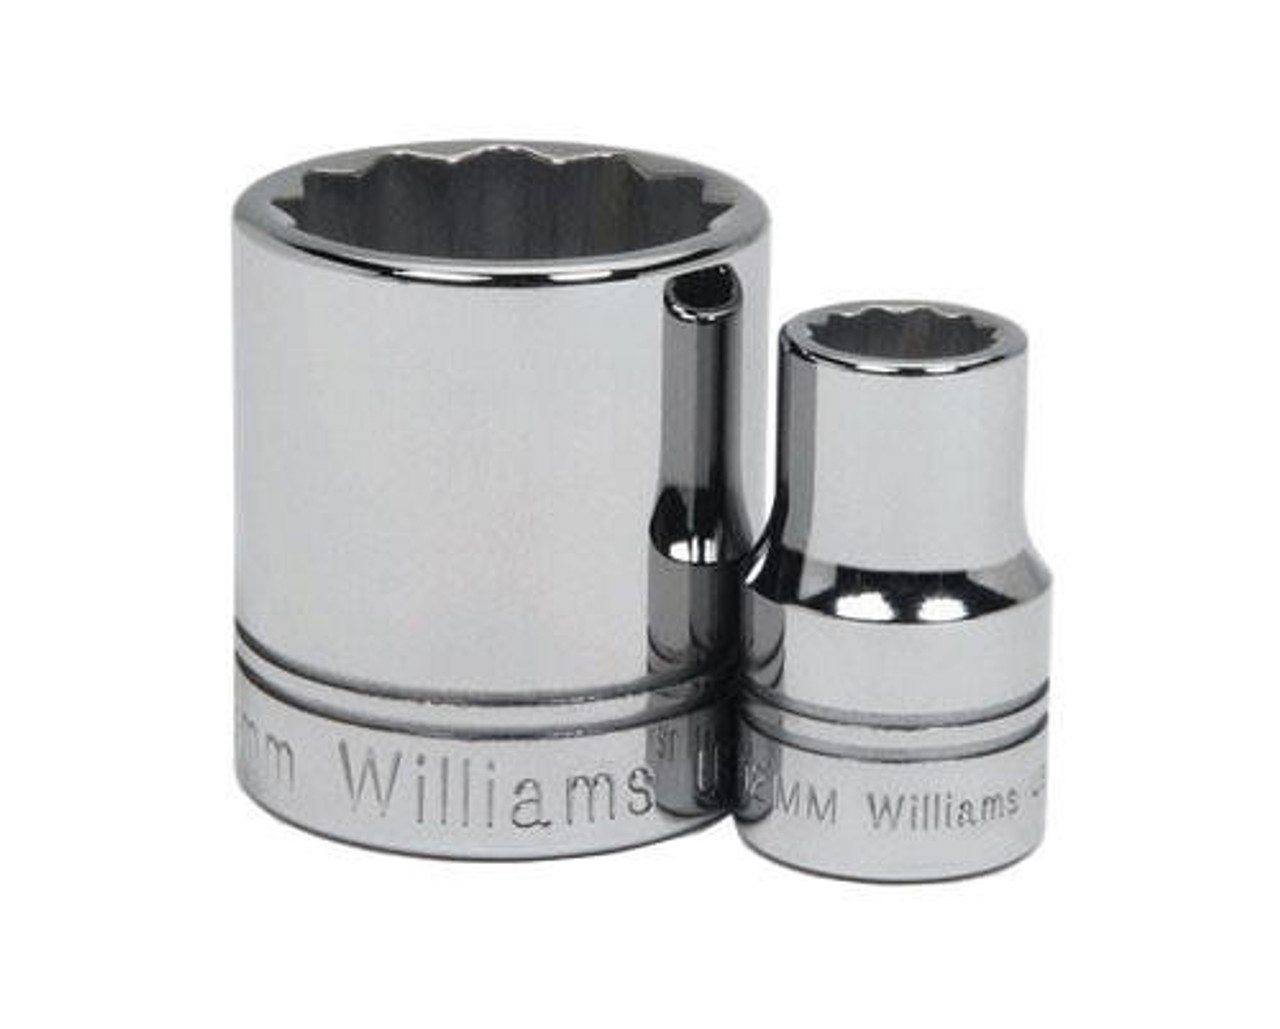 Williams Made In USA 26MM Williams 1/2" Dr Shallow Socket 12 Pt - STM-1226 